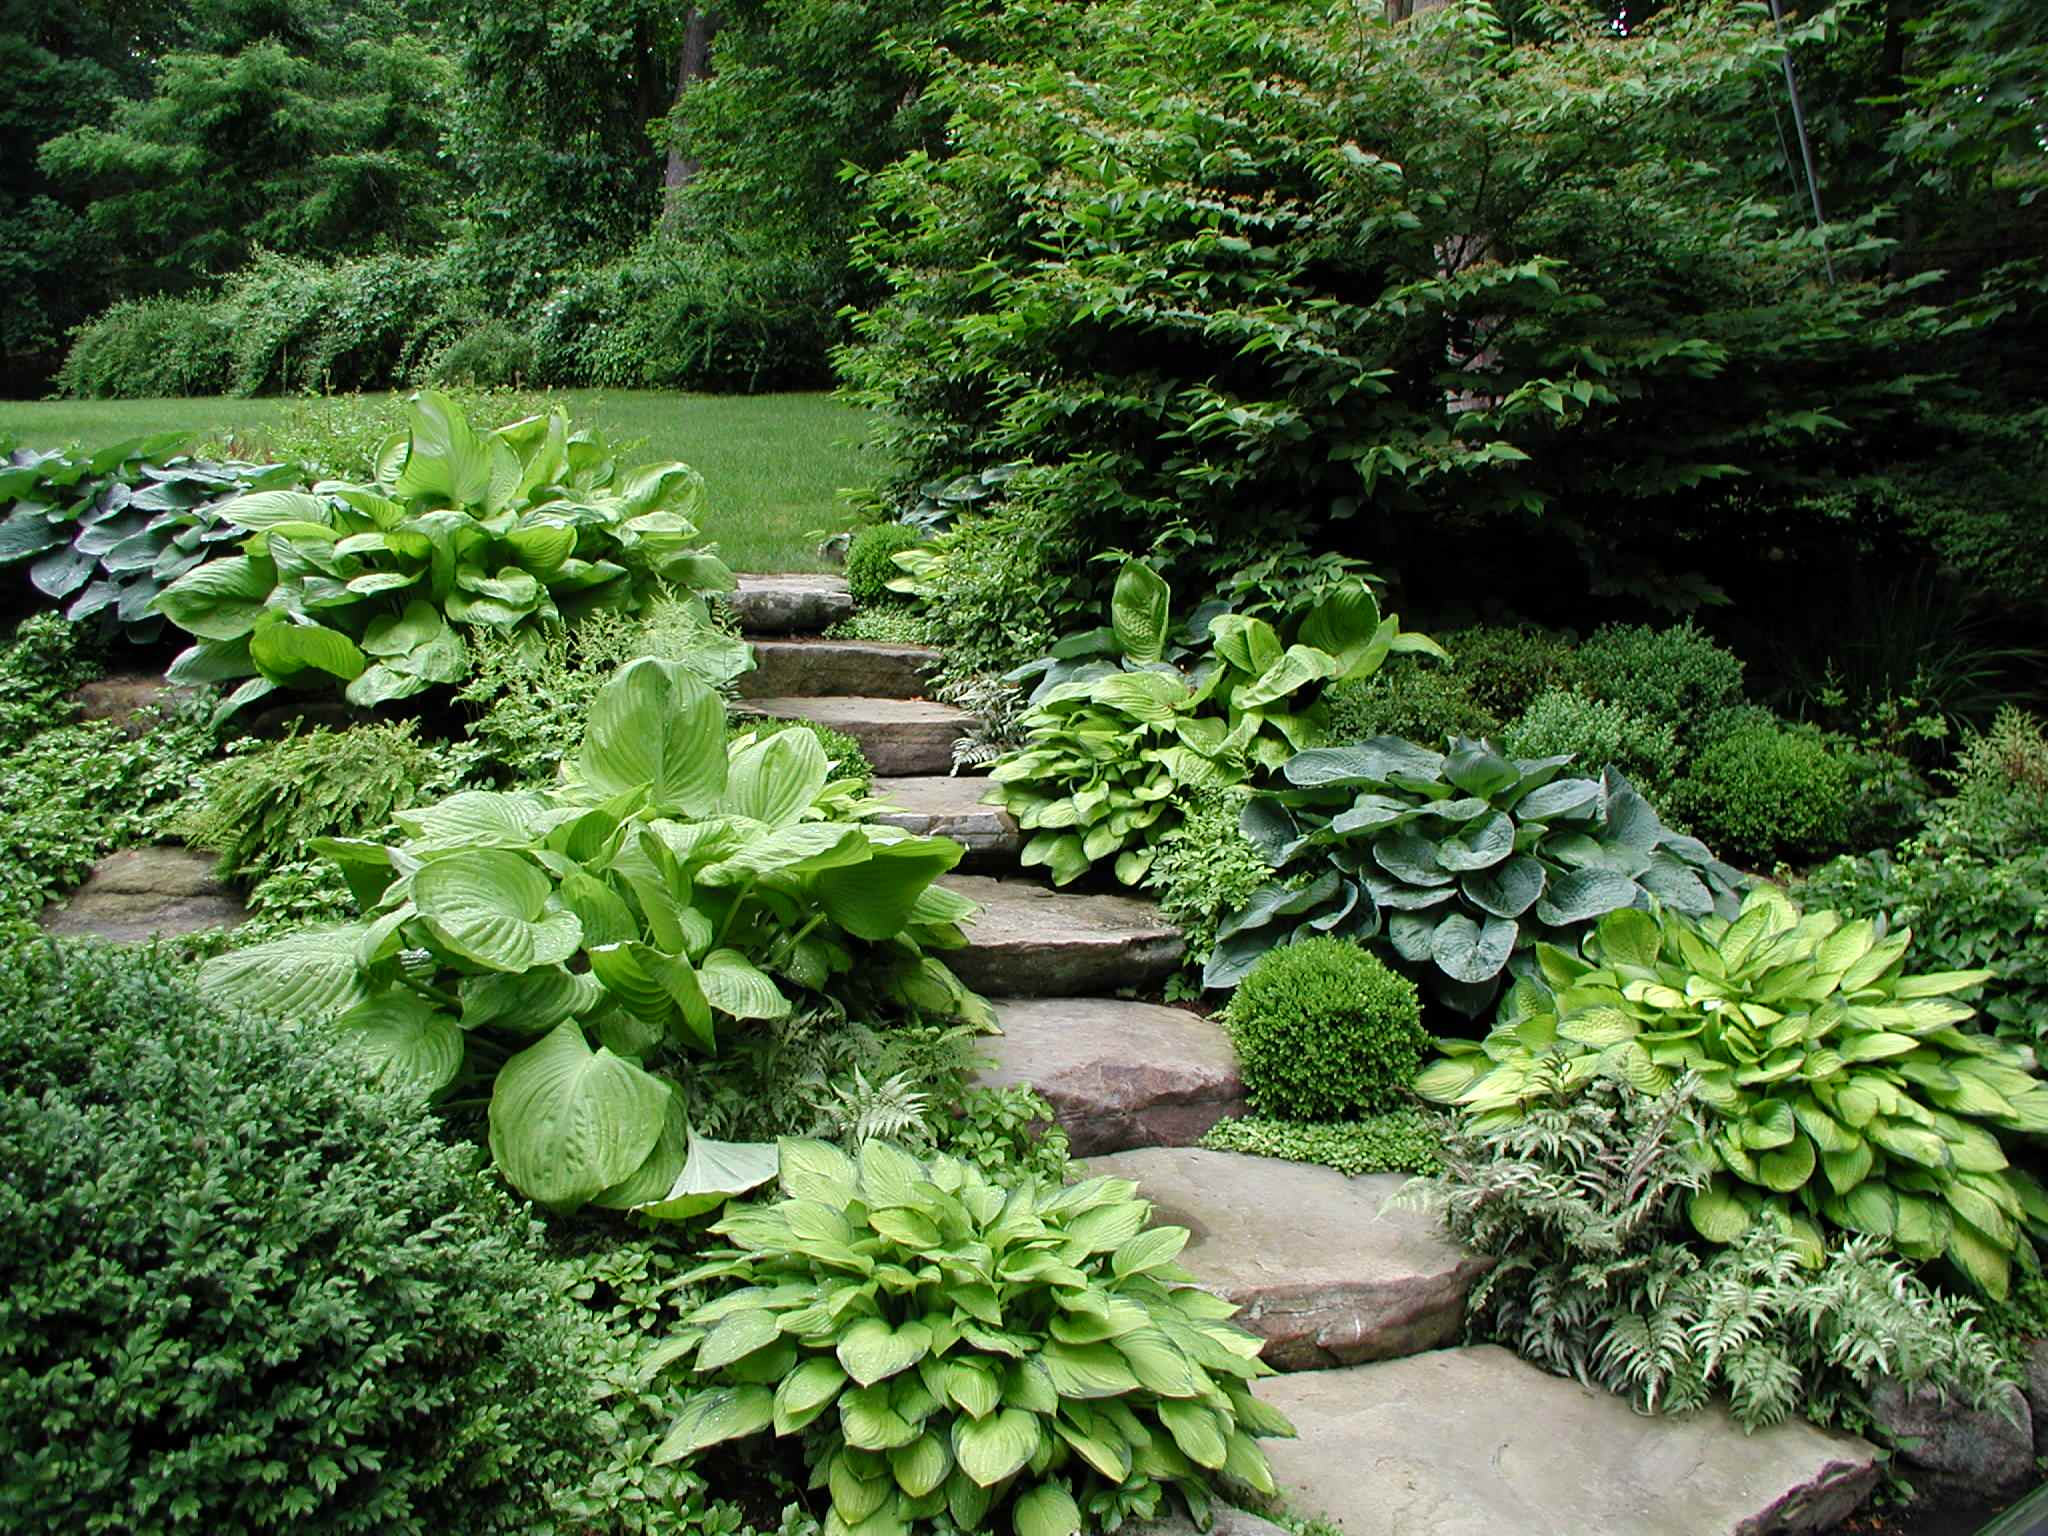 10 Hillside Landscaping Ideas That Will Improve Your Yard